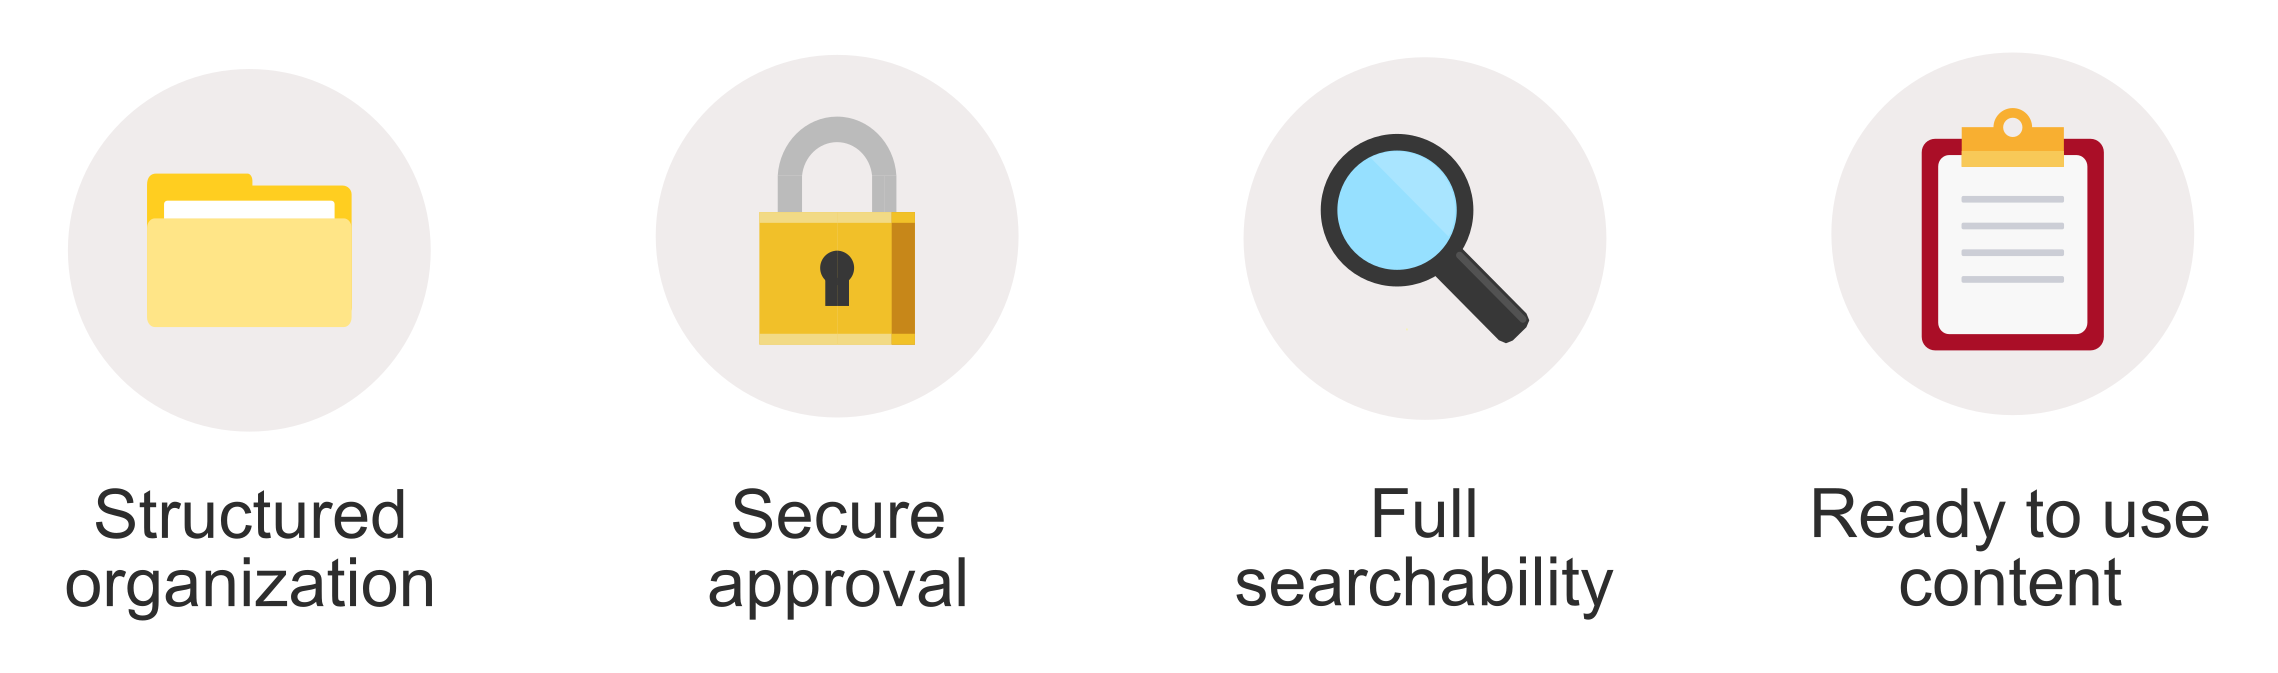 Icons and text: yellow folder for Structured organization; gold padlock for Secure approval; blue magnifying glass for Full searchability; and a red clipboard with a document for Ready to use content.